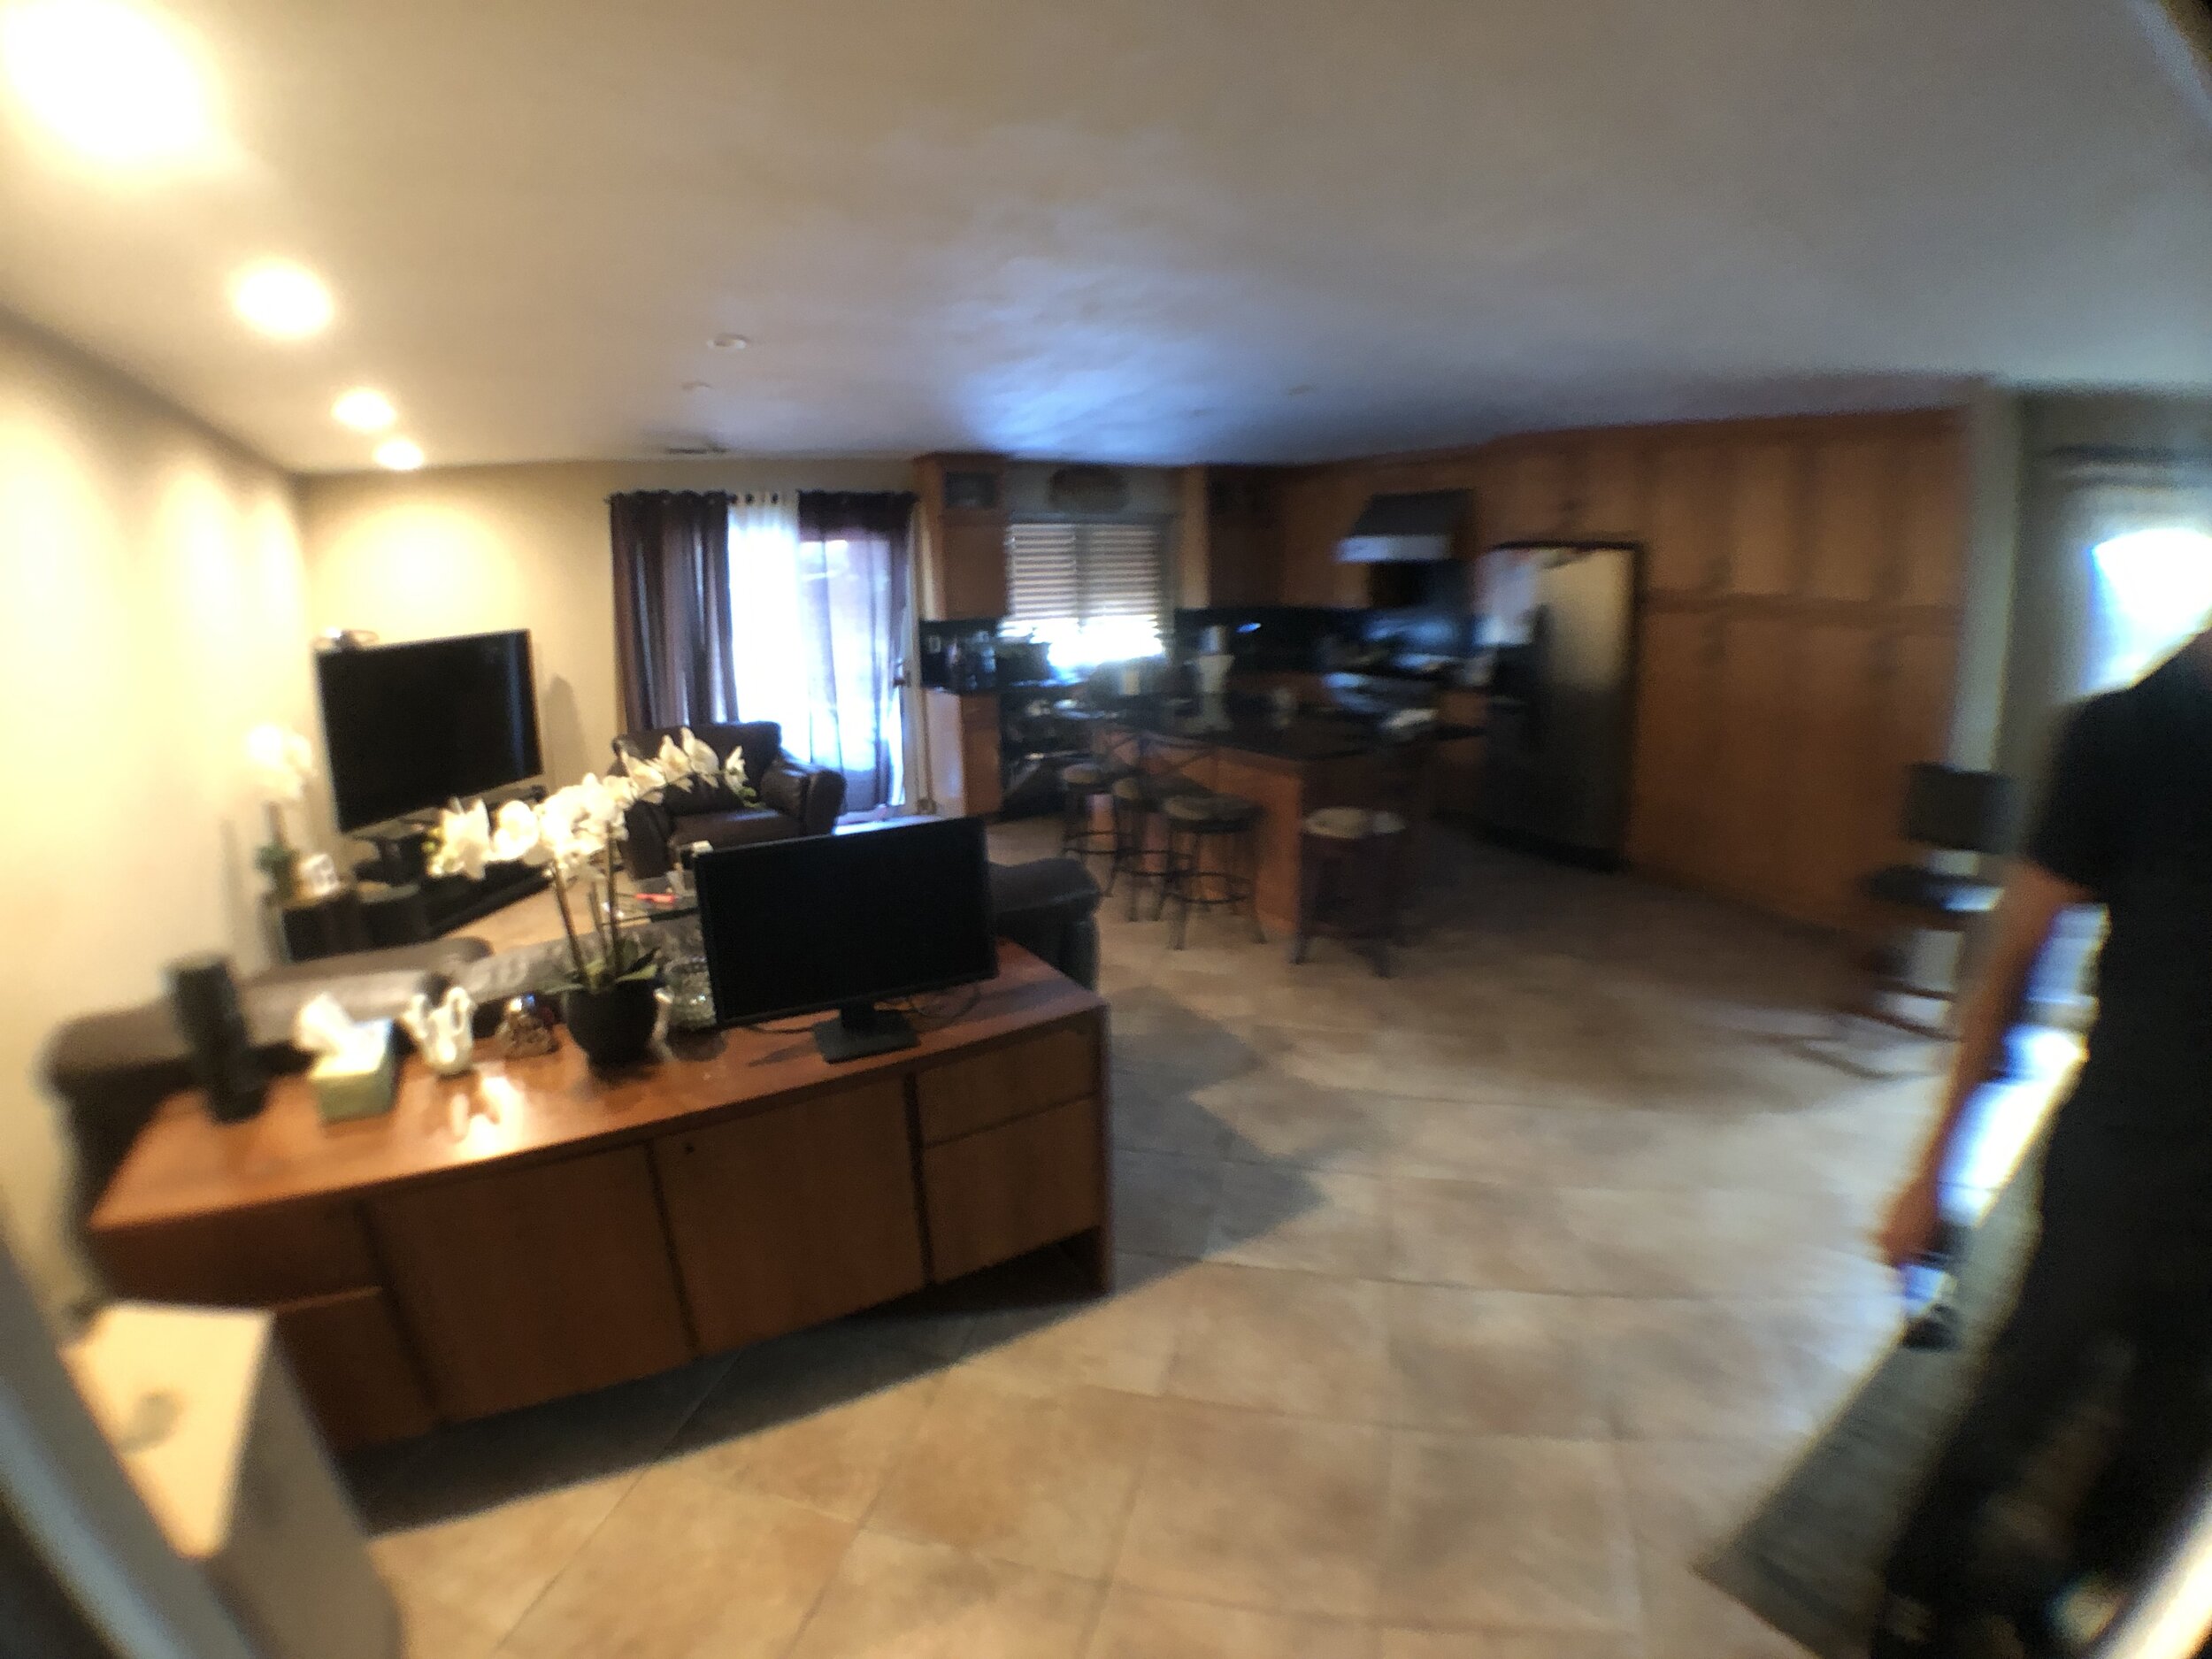 Kitchen and Family Room.JPG